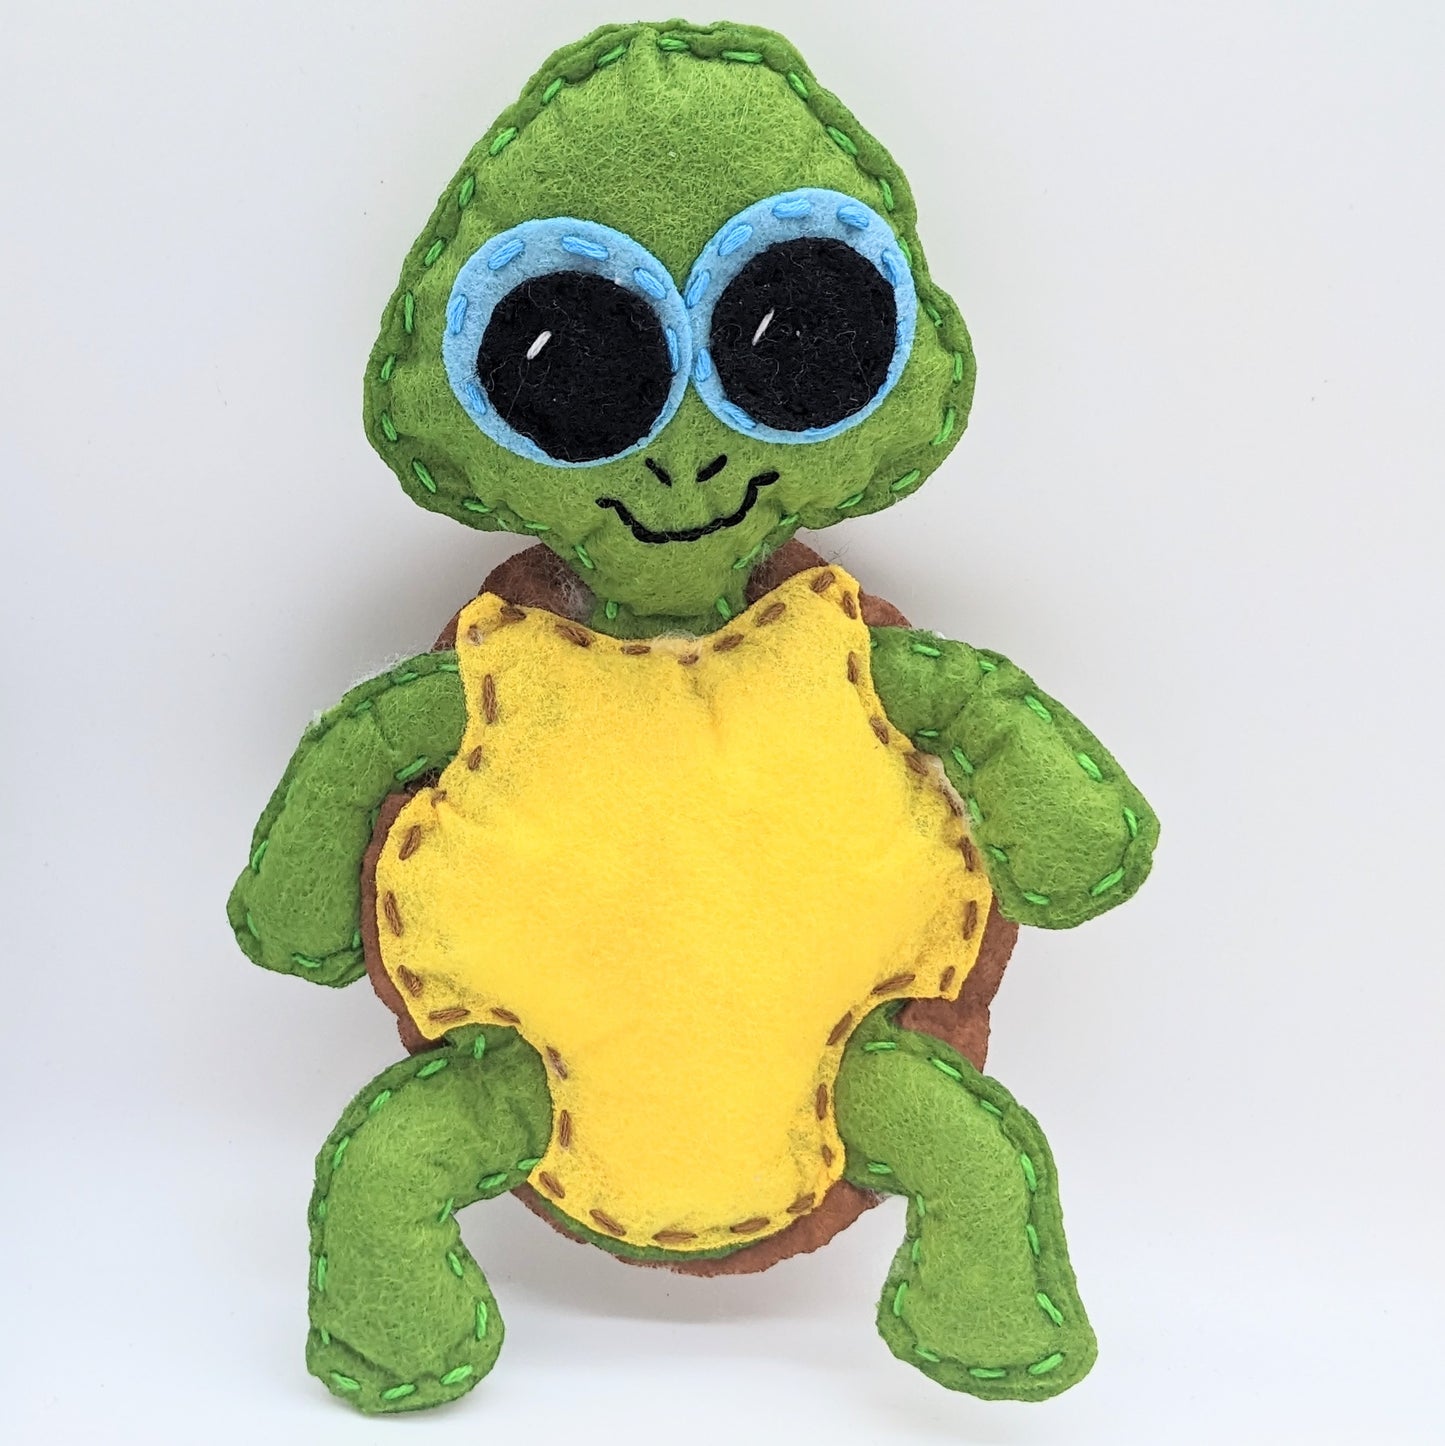 Sew My Goodness Sewing Kit: Ollie the Turtle